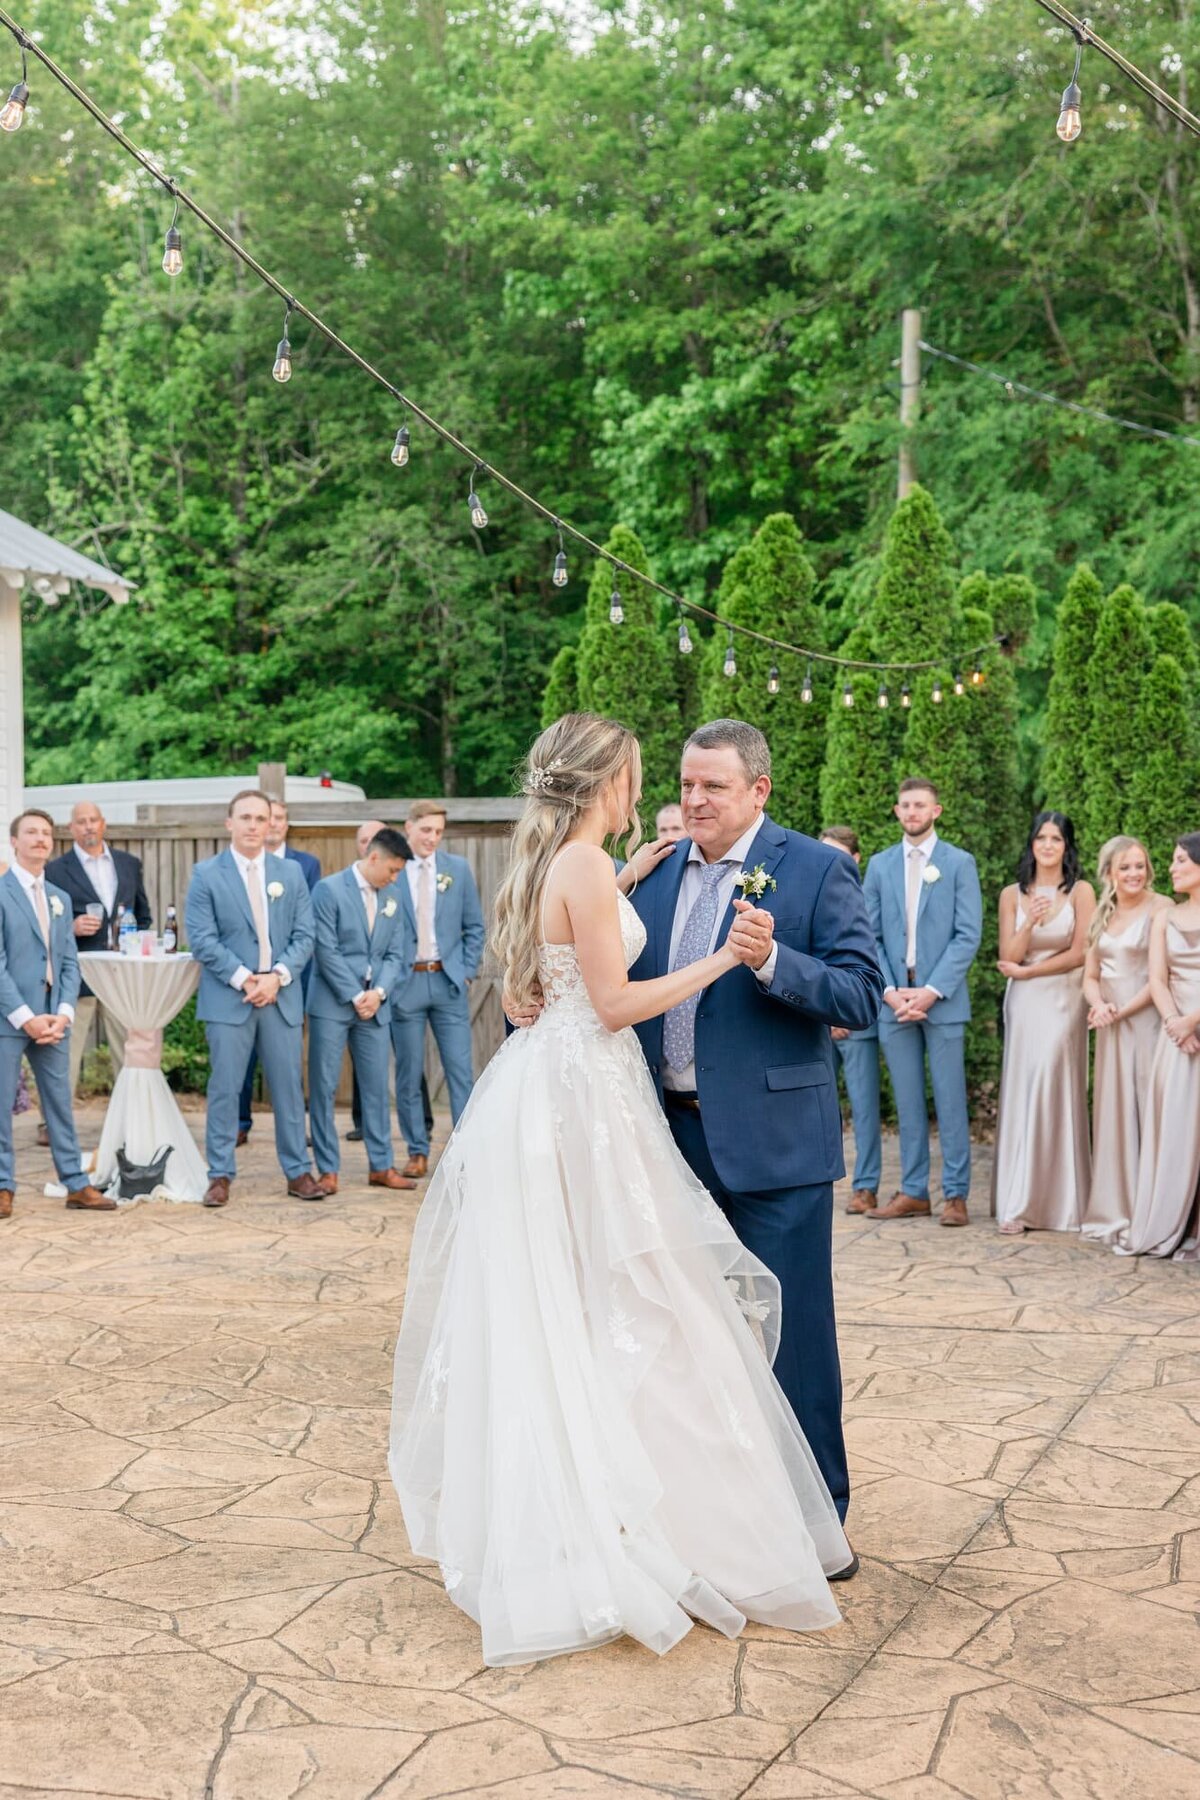 Katie and Alec Wedding Photography Wedding Videography Birmingham, Alabama Husband and Wife Team Photo Video Weddings Engagement Engagements Light Airy Focused on Marriage  Samantha + Connor's Sonne_xB6V